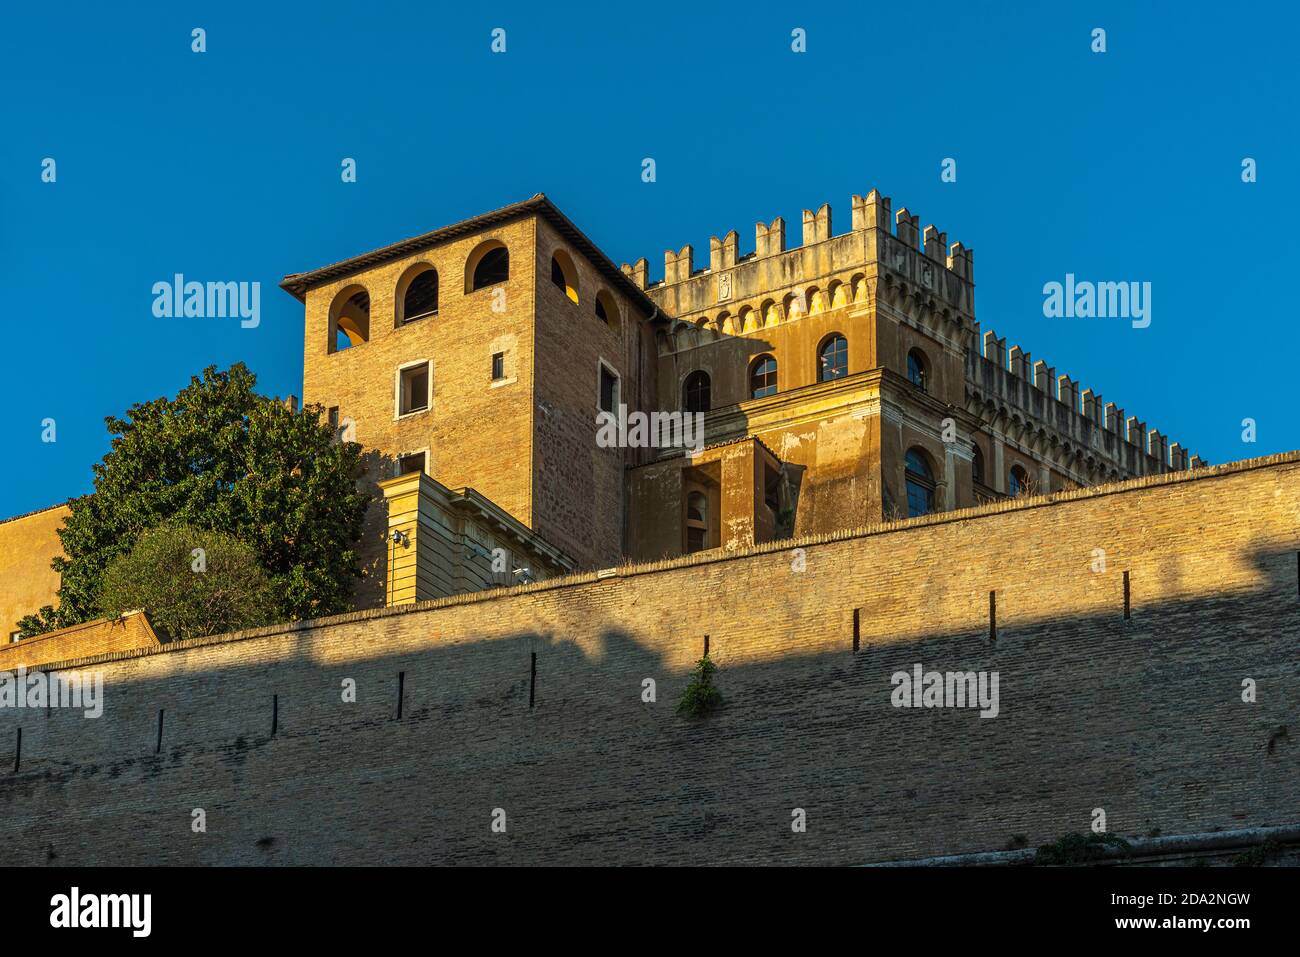 The Belvedere courtyard is a vast building complex located north of St. Peter's Basilica in the Vatican and the Apostolic palaces in Rome. Stock Photo